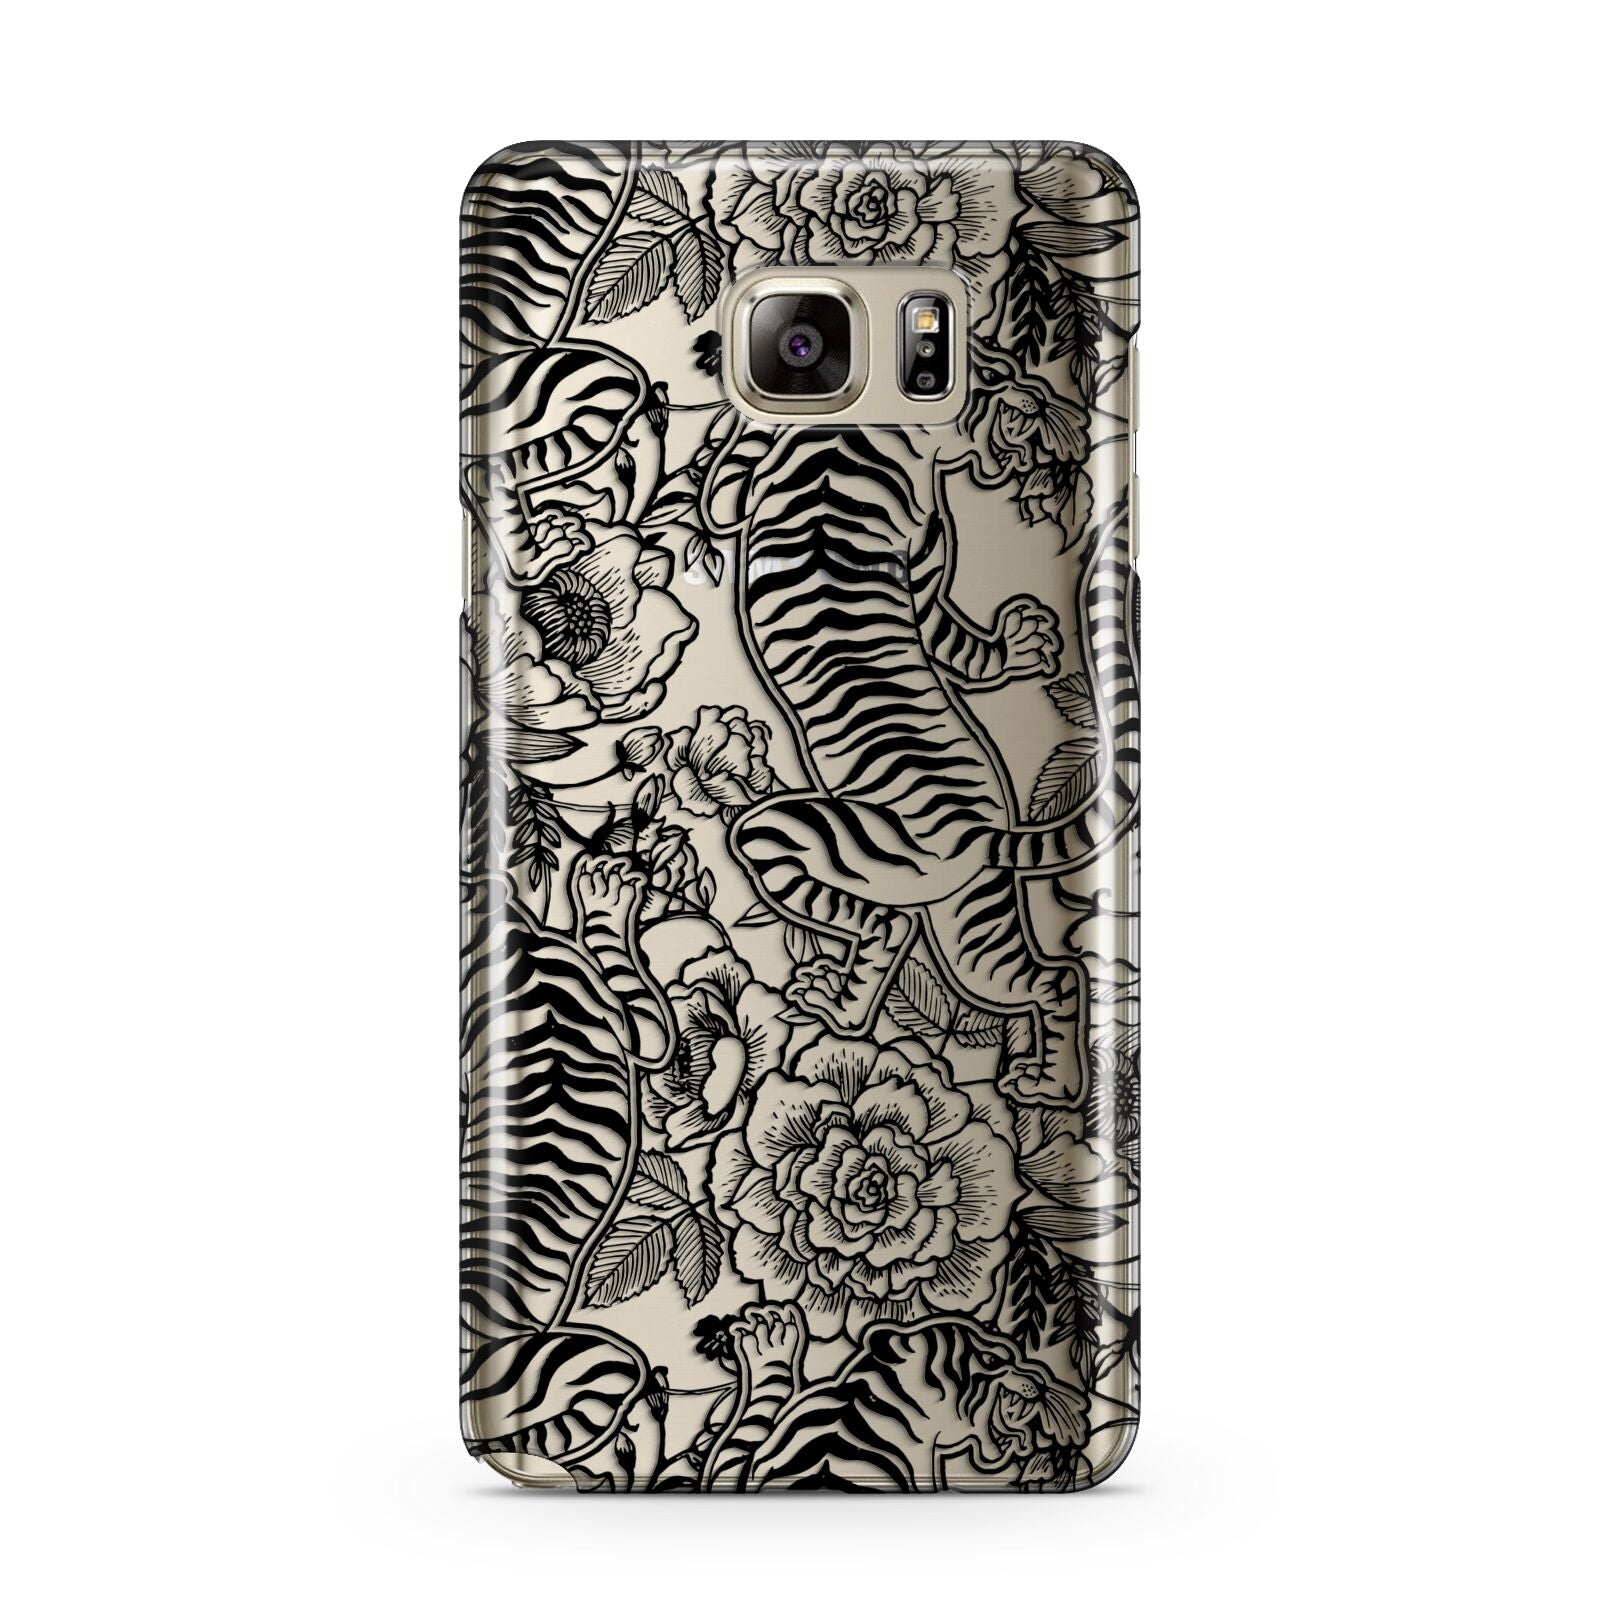 Chinese Tiger Samsung Galaxy Note 5 Case